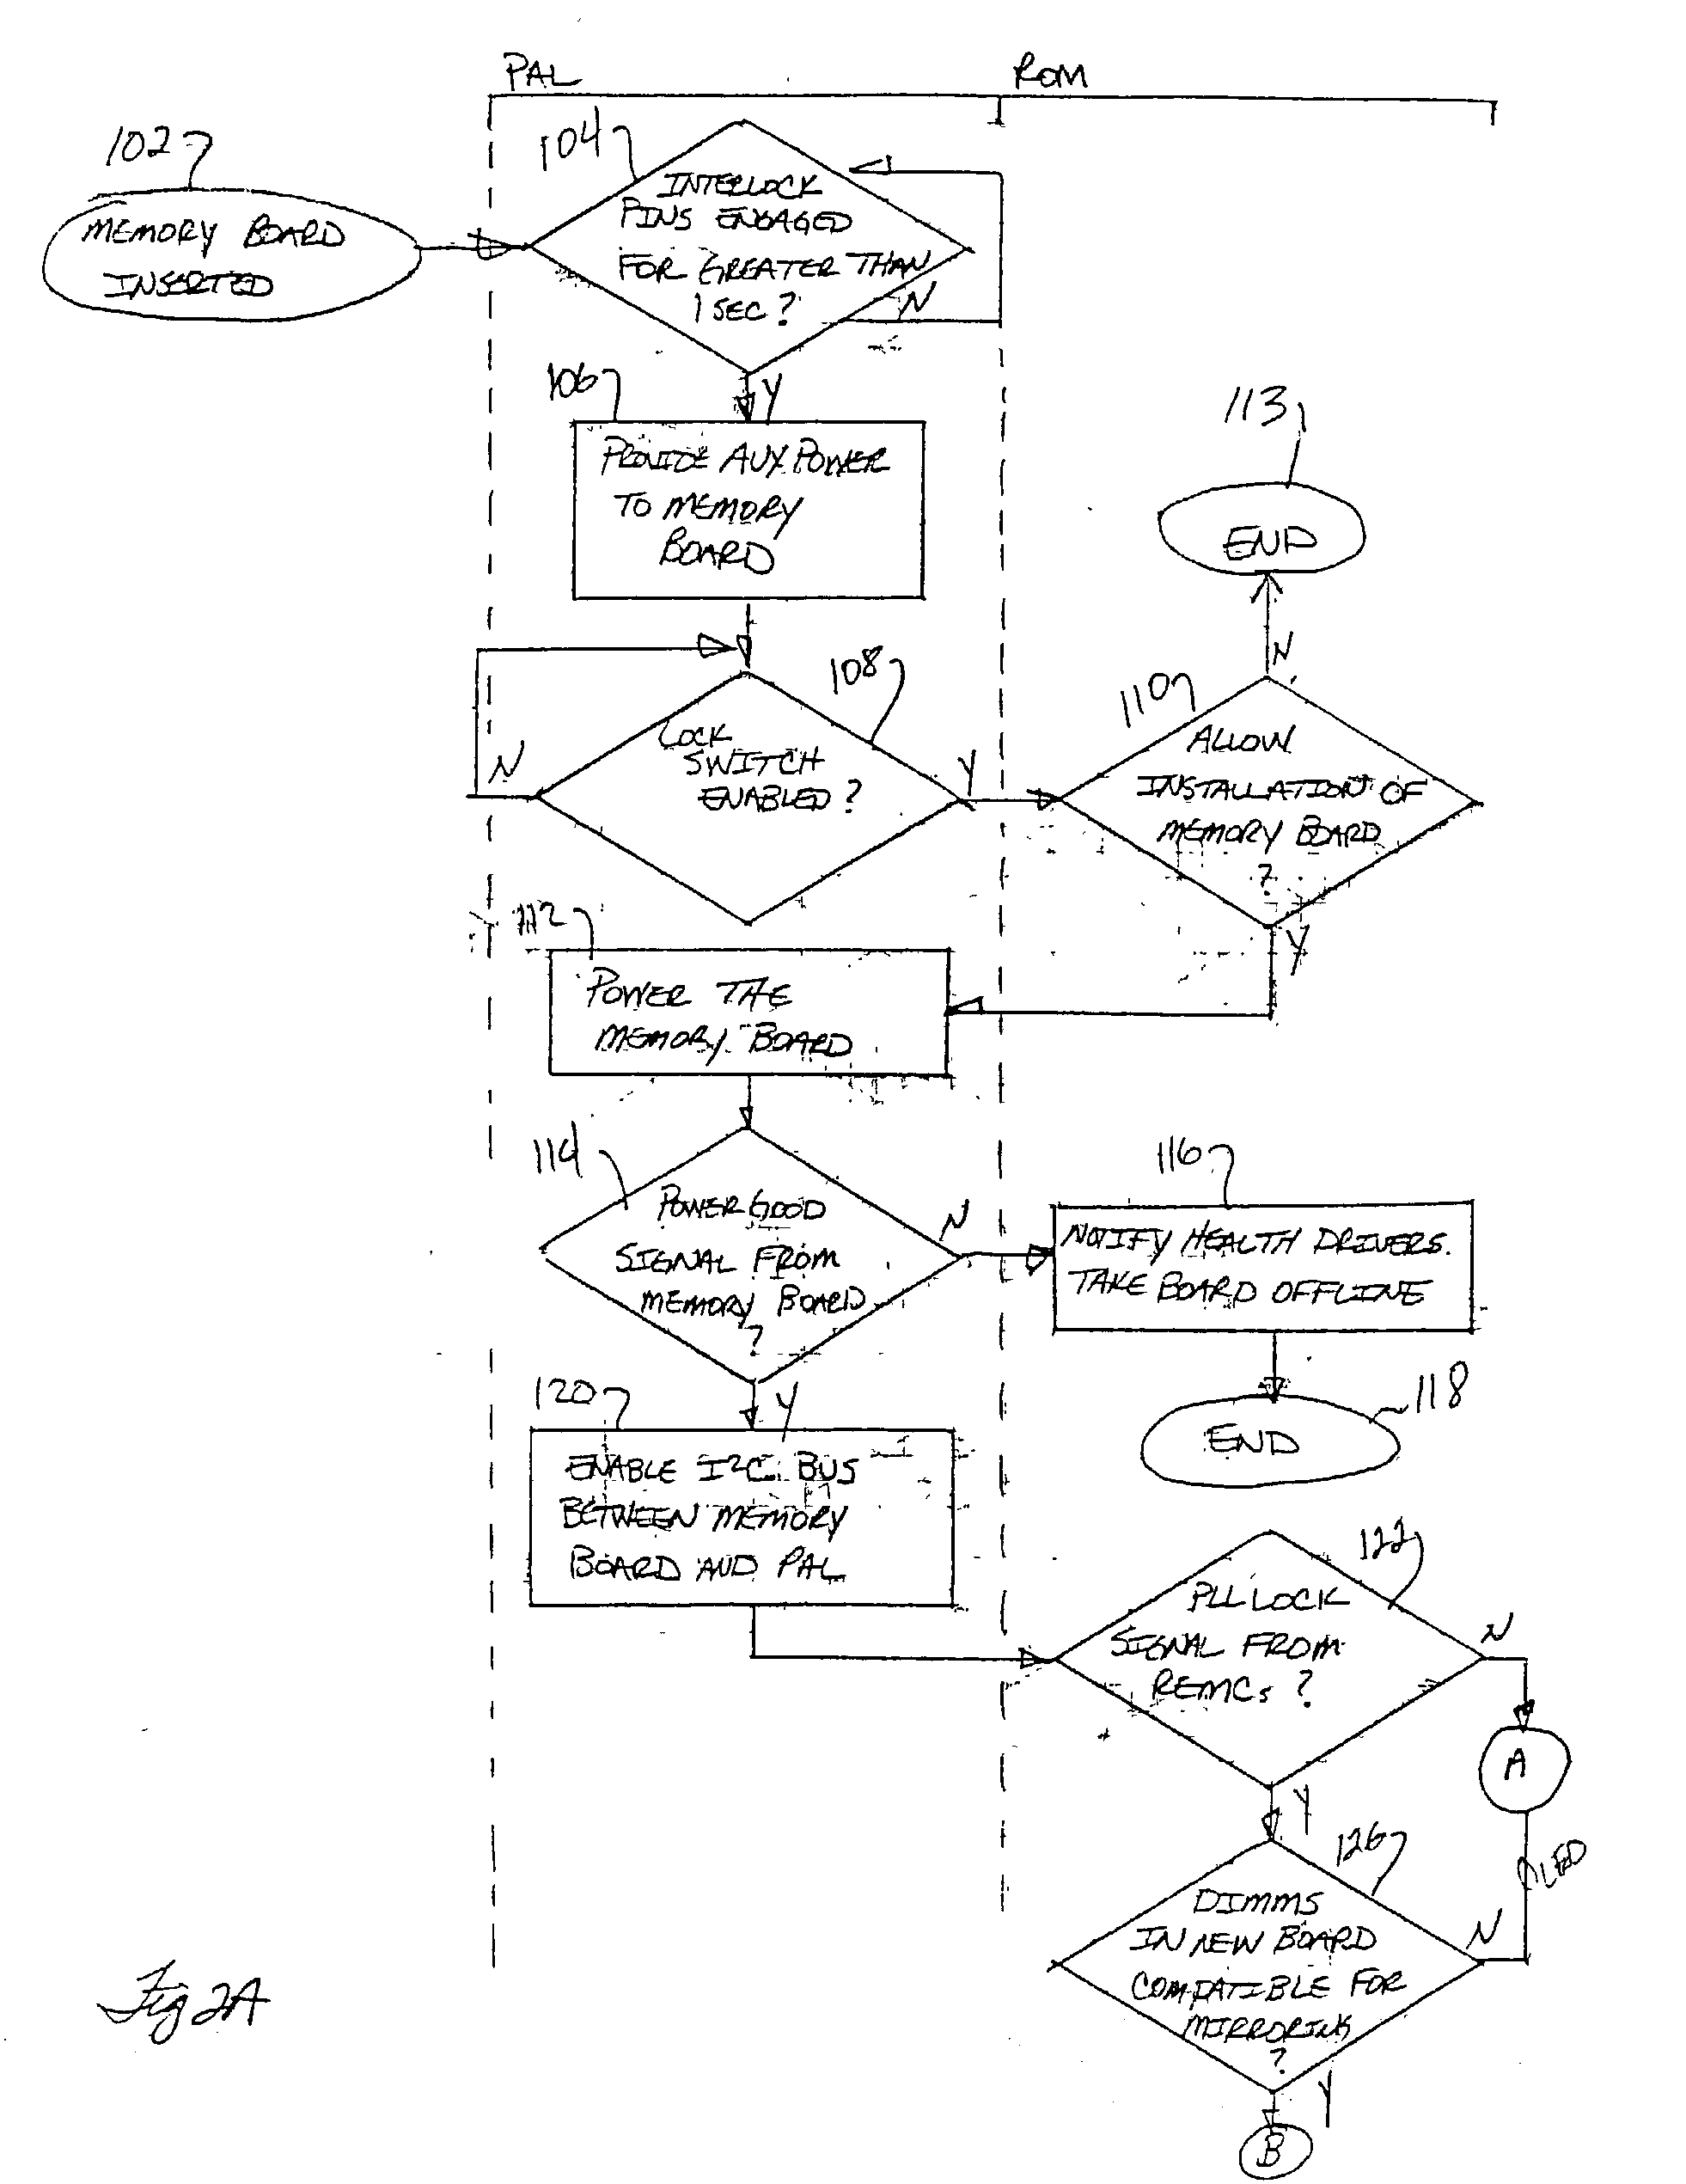 Computer system architecture with hot pluggable main memory boards